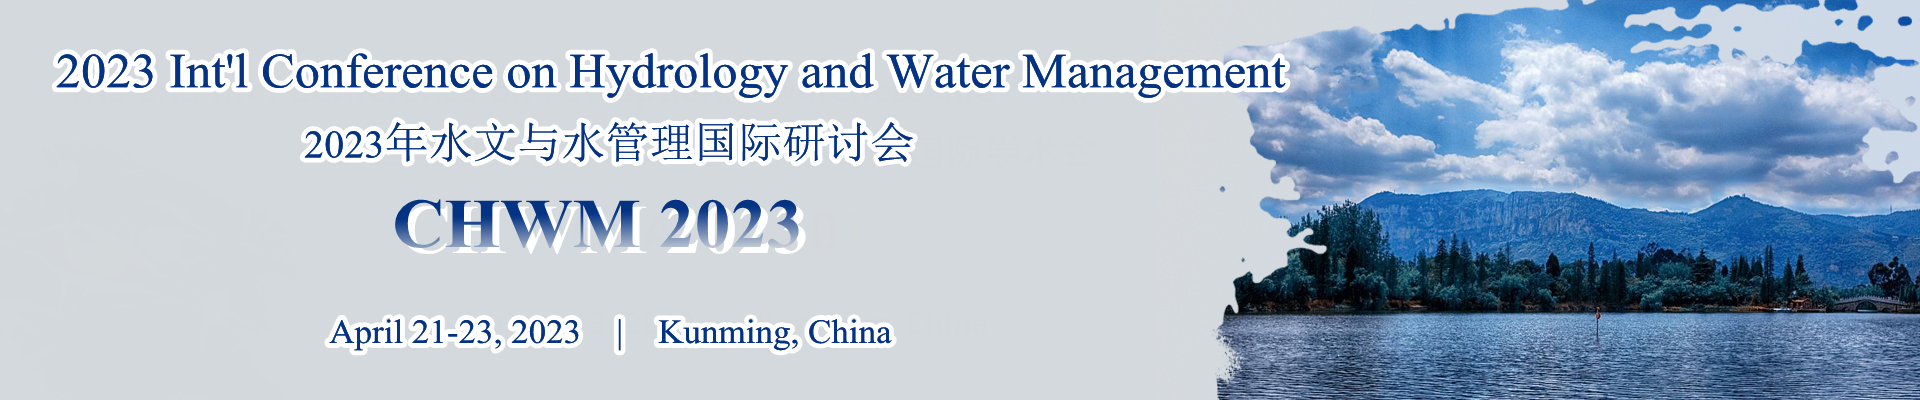 2023 Int’l Conference on Hydrology and Water Management (CHWM 2023), Kunming, Yunnan, China